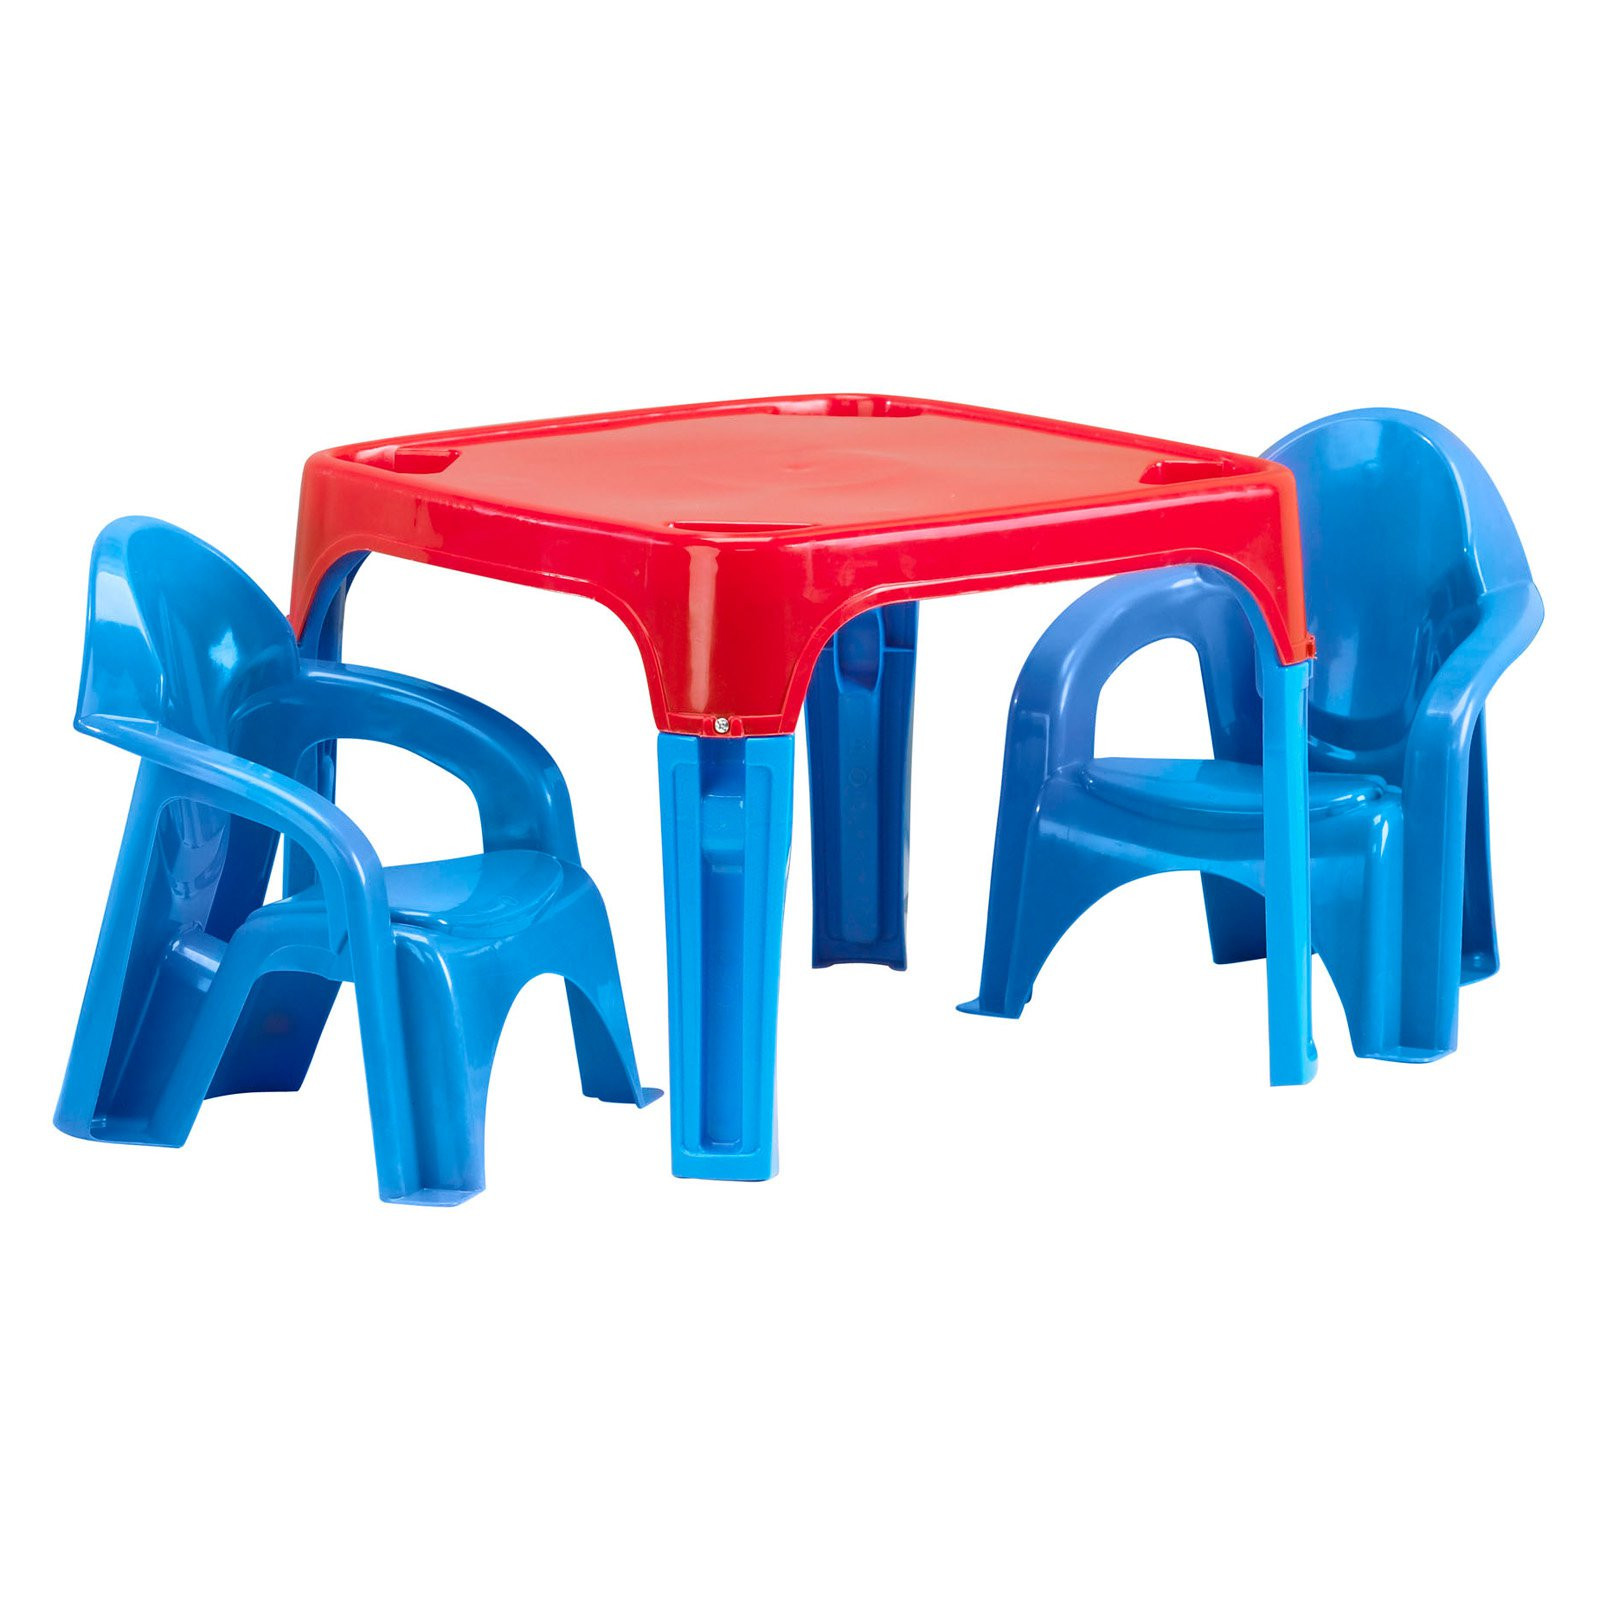 Kids Table And Chairs Walmart
 American Plastic Toys Kids Table and Chairs Walmart